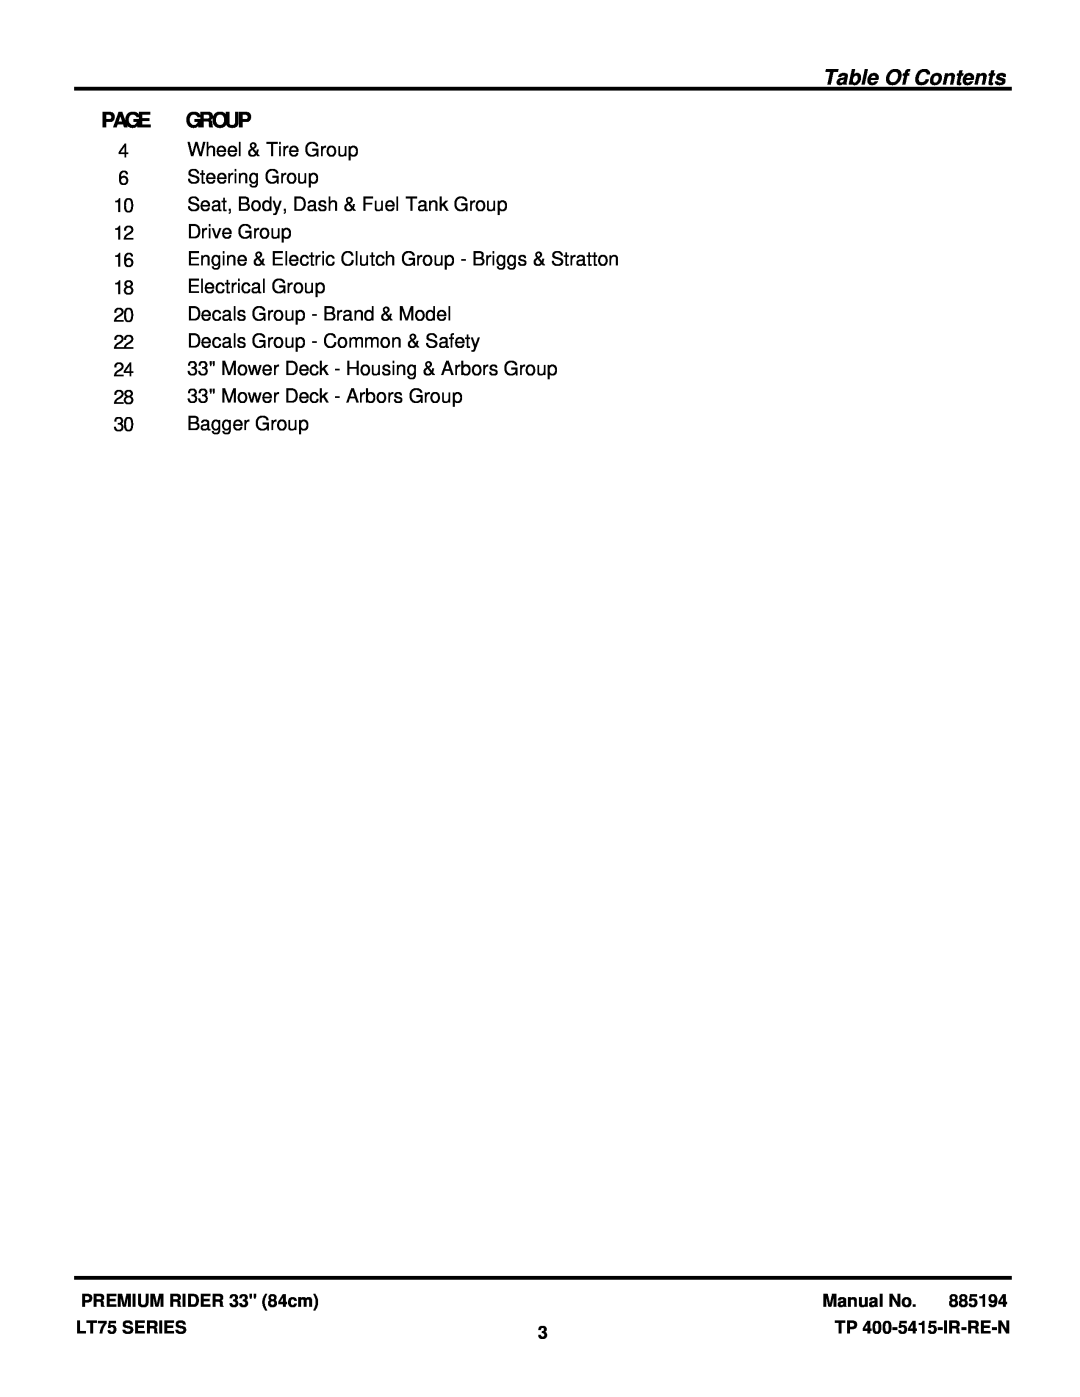 Snapper LT75 SERIES manual Table Of Contents, Page Group, 4Wheel & Tire Group 6Steering Group, 12Drive Group 